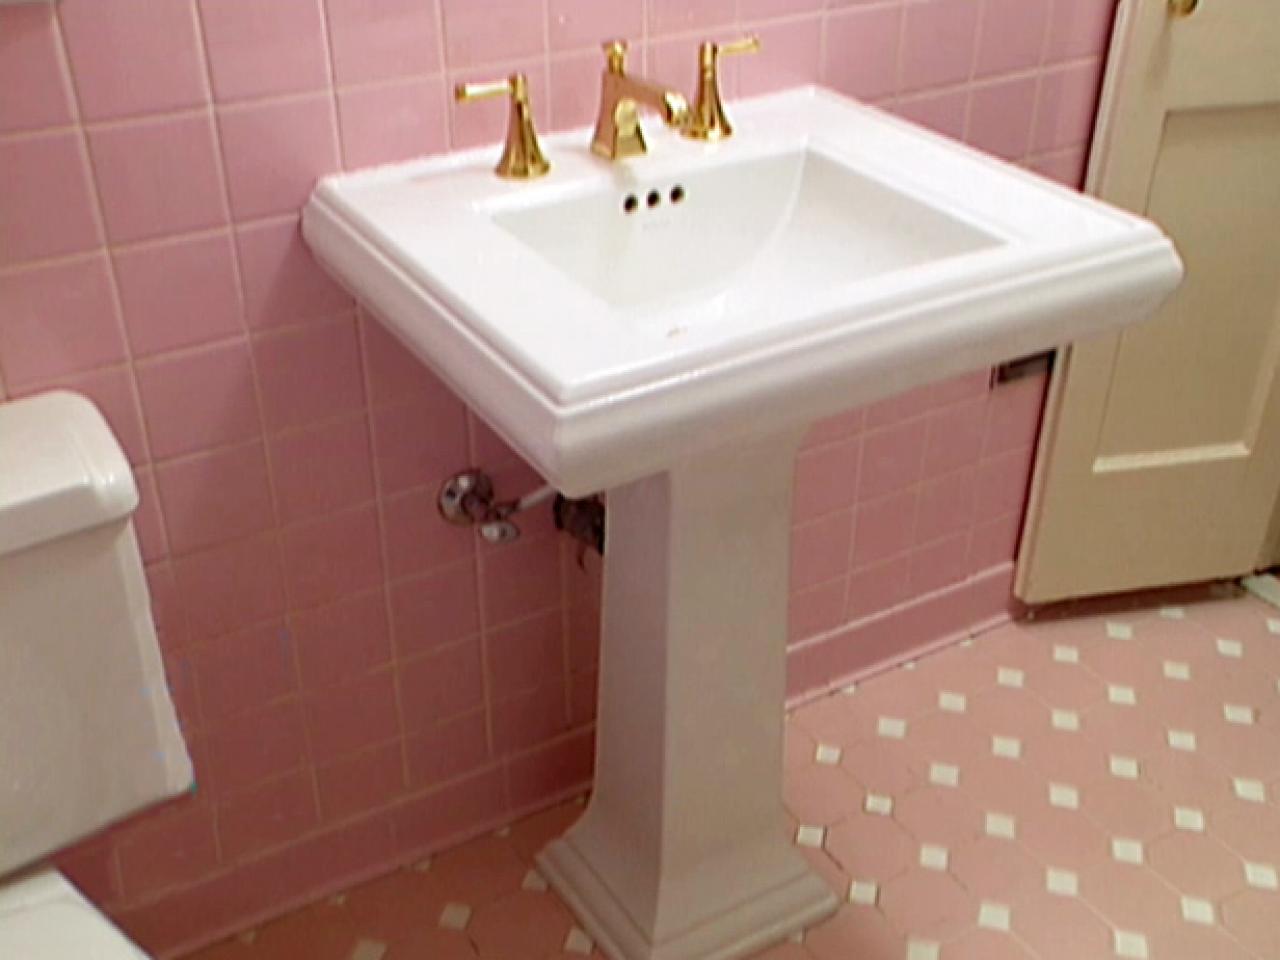 Pedestal Sink Installation How Tos Diy, What Size Vanity To Replace Pedestal Sink